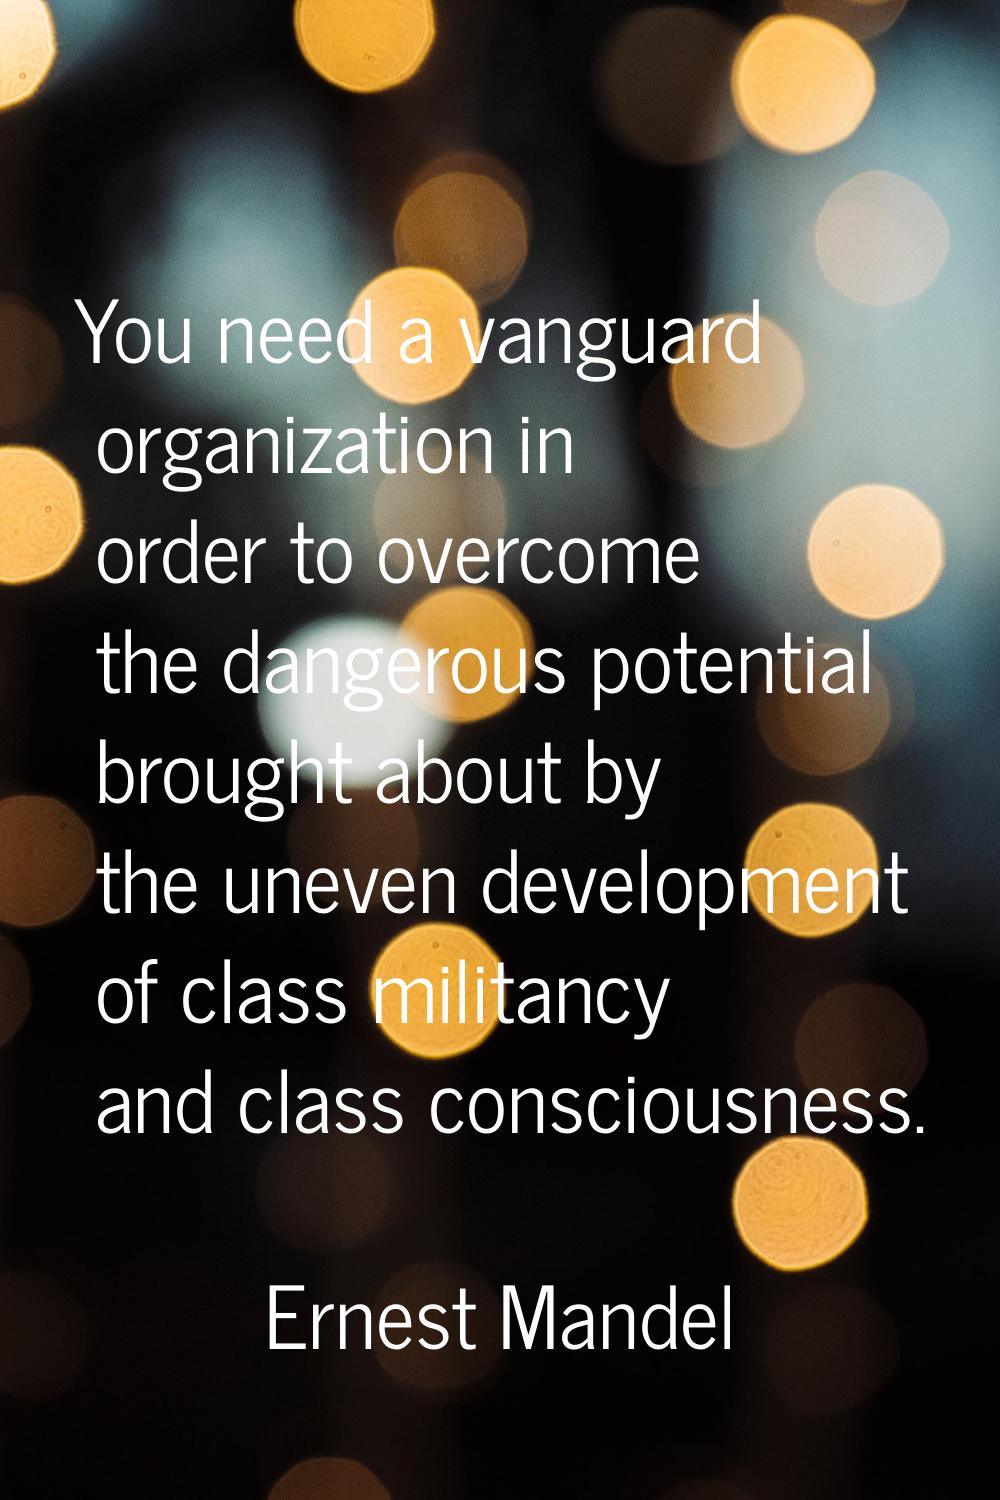 You need a vanguard organization in order to overcome the dangerous potential brought about by the 